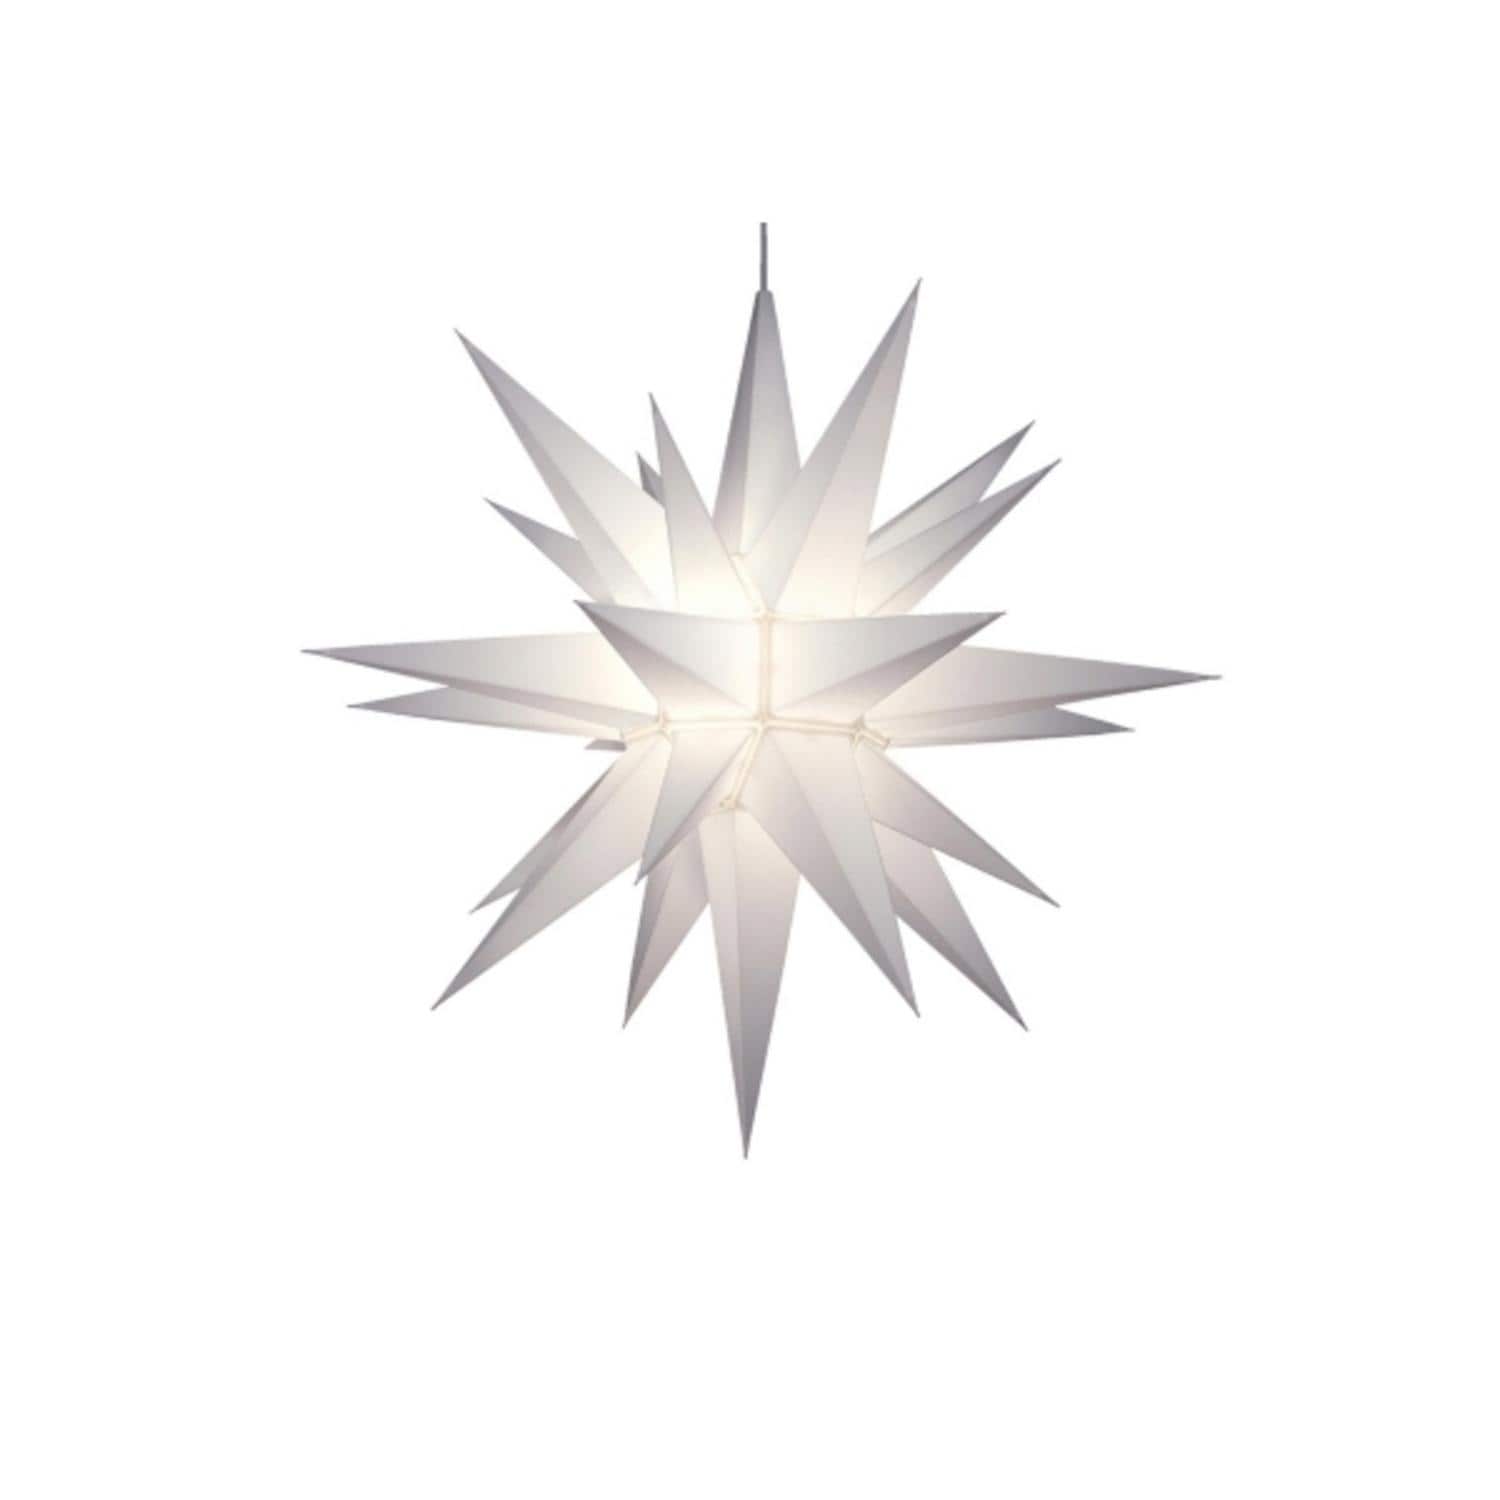 12 inch White LED Lighted Moravian Star Christmas Decoration